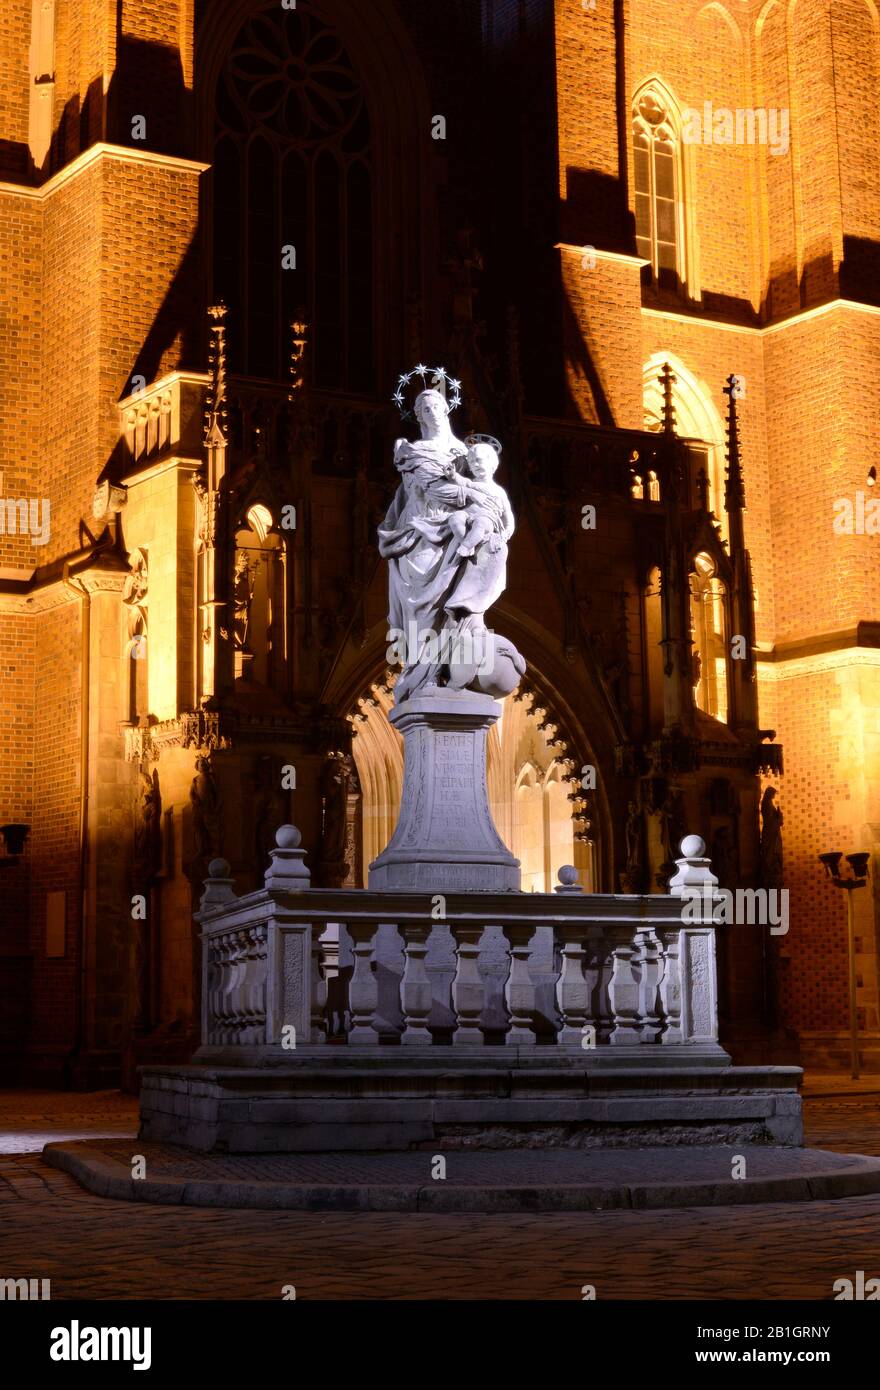 Wroclaw, Poland 04-18-2013 sculpture of the virgin mary with child front of the cathedral by night Stock Photo